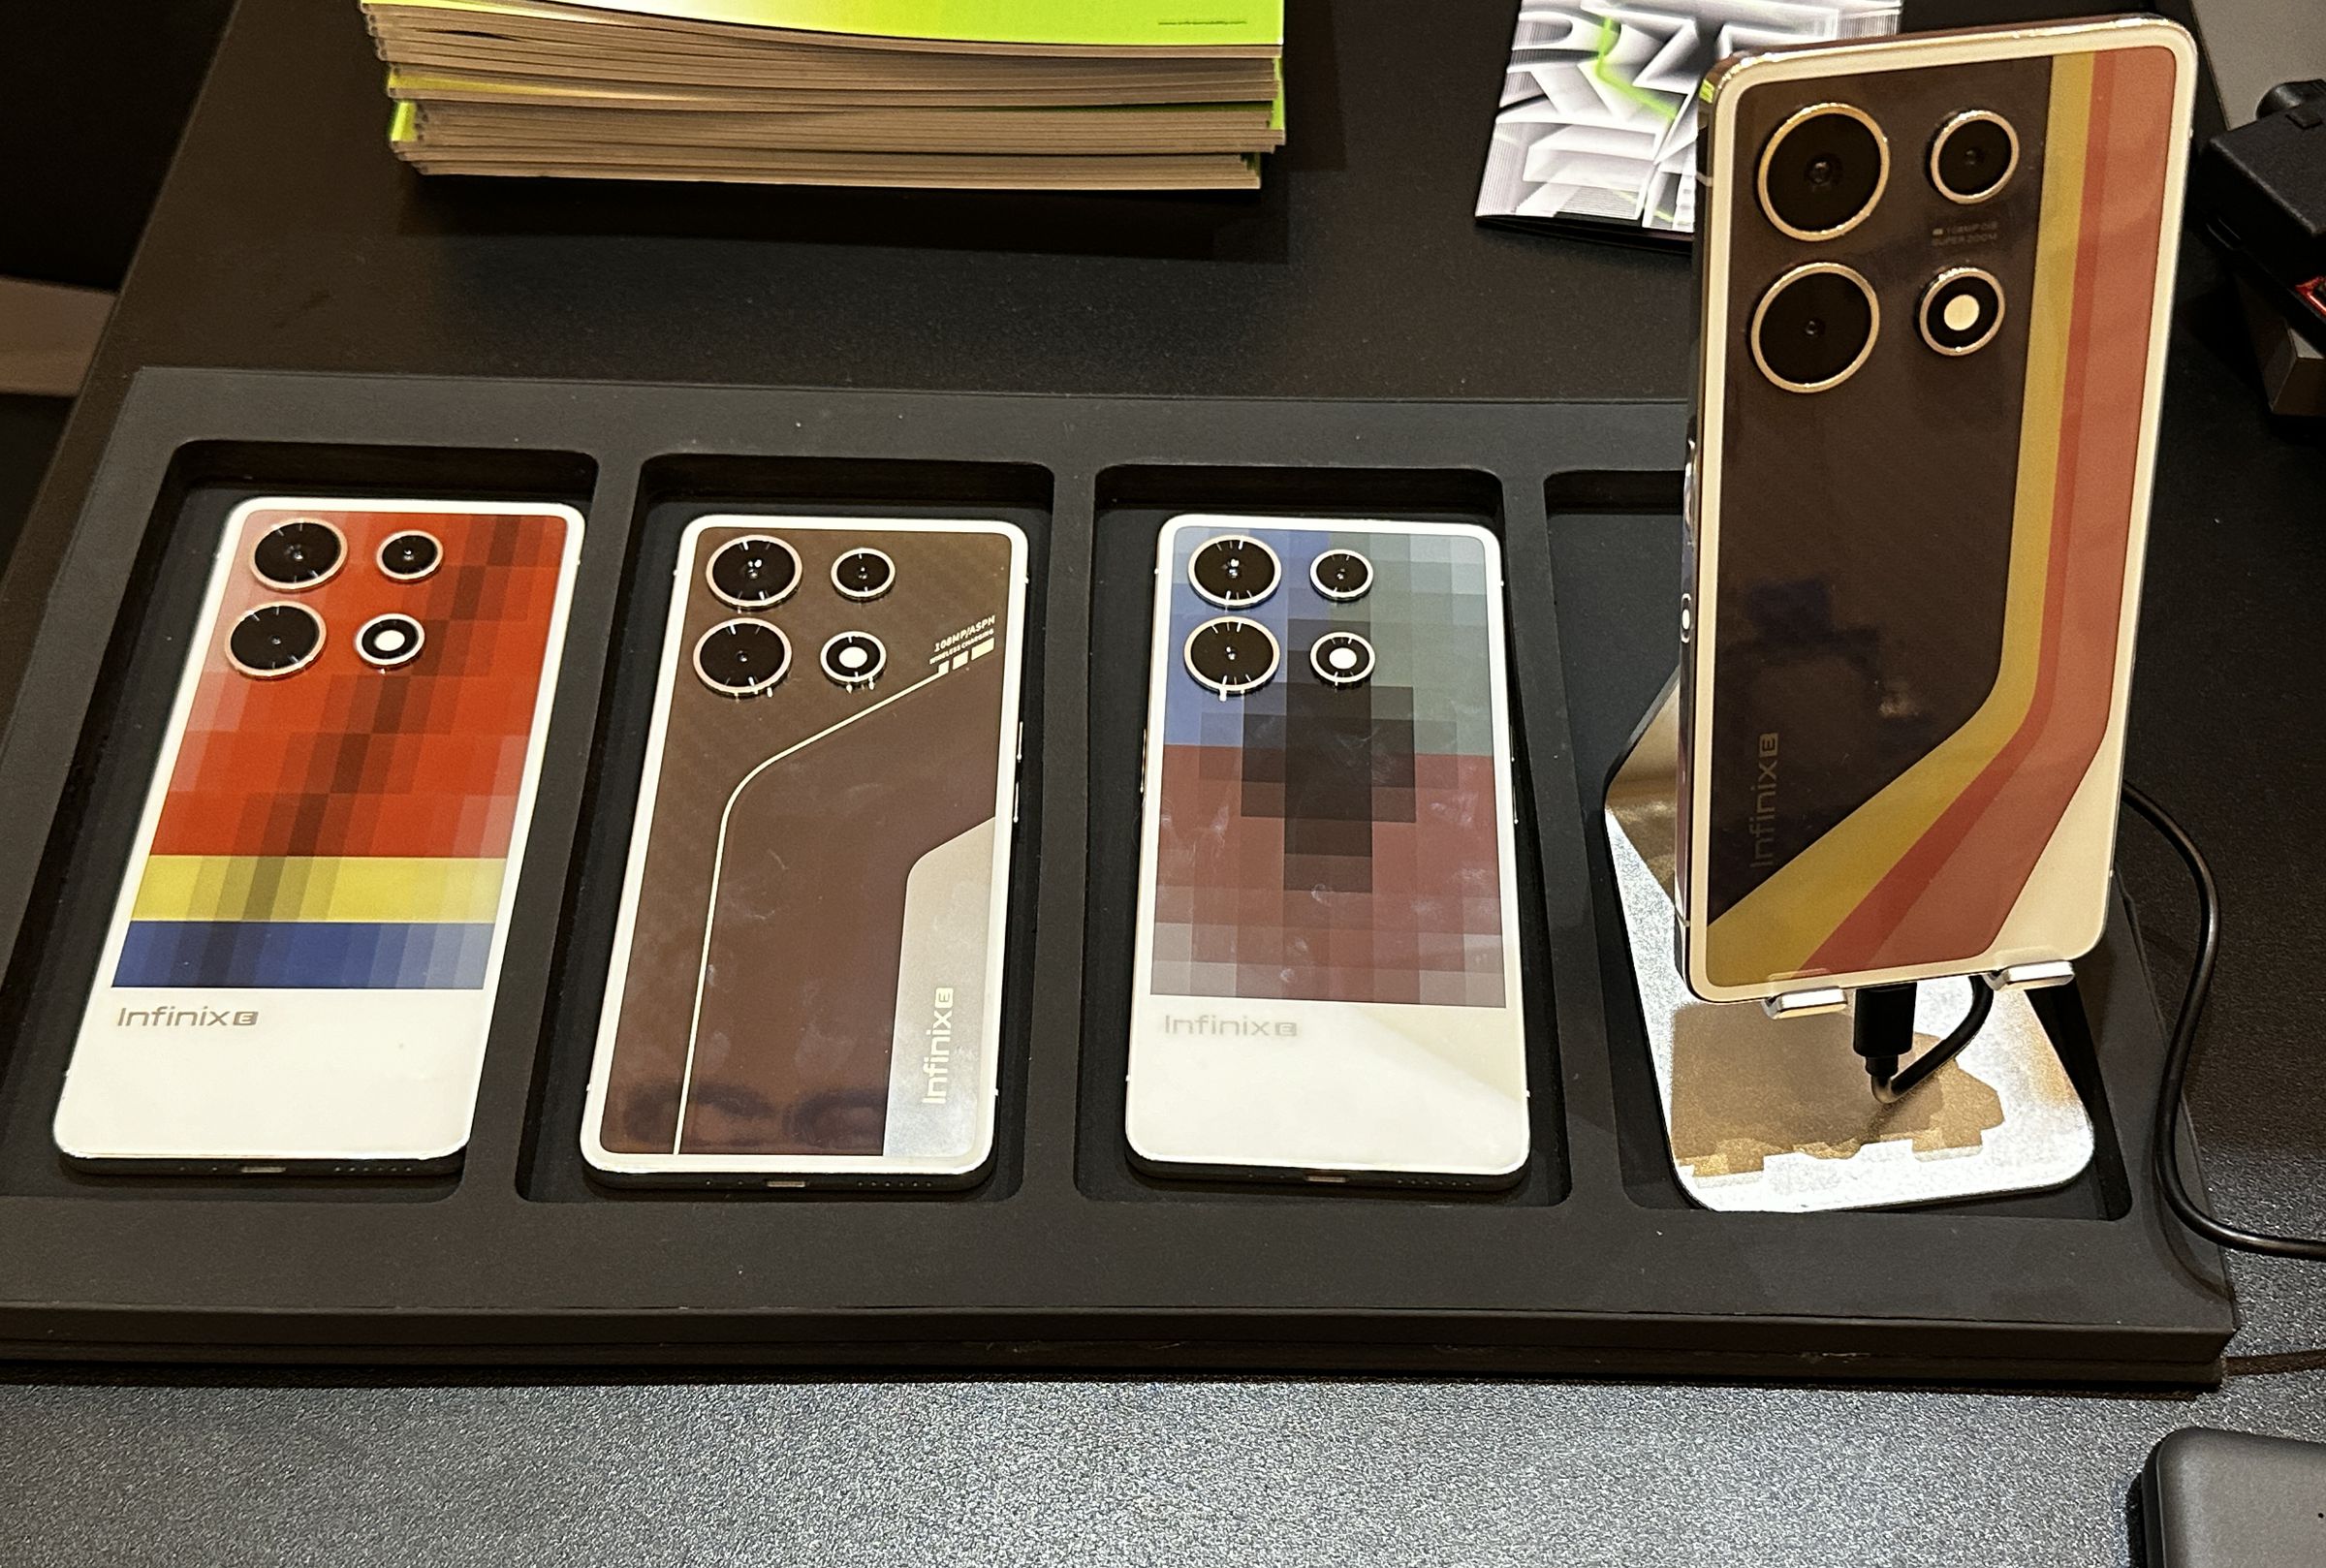 and image of four phones. They’re all covered in vibrant geometrical patterns.